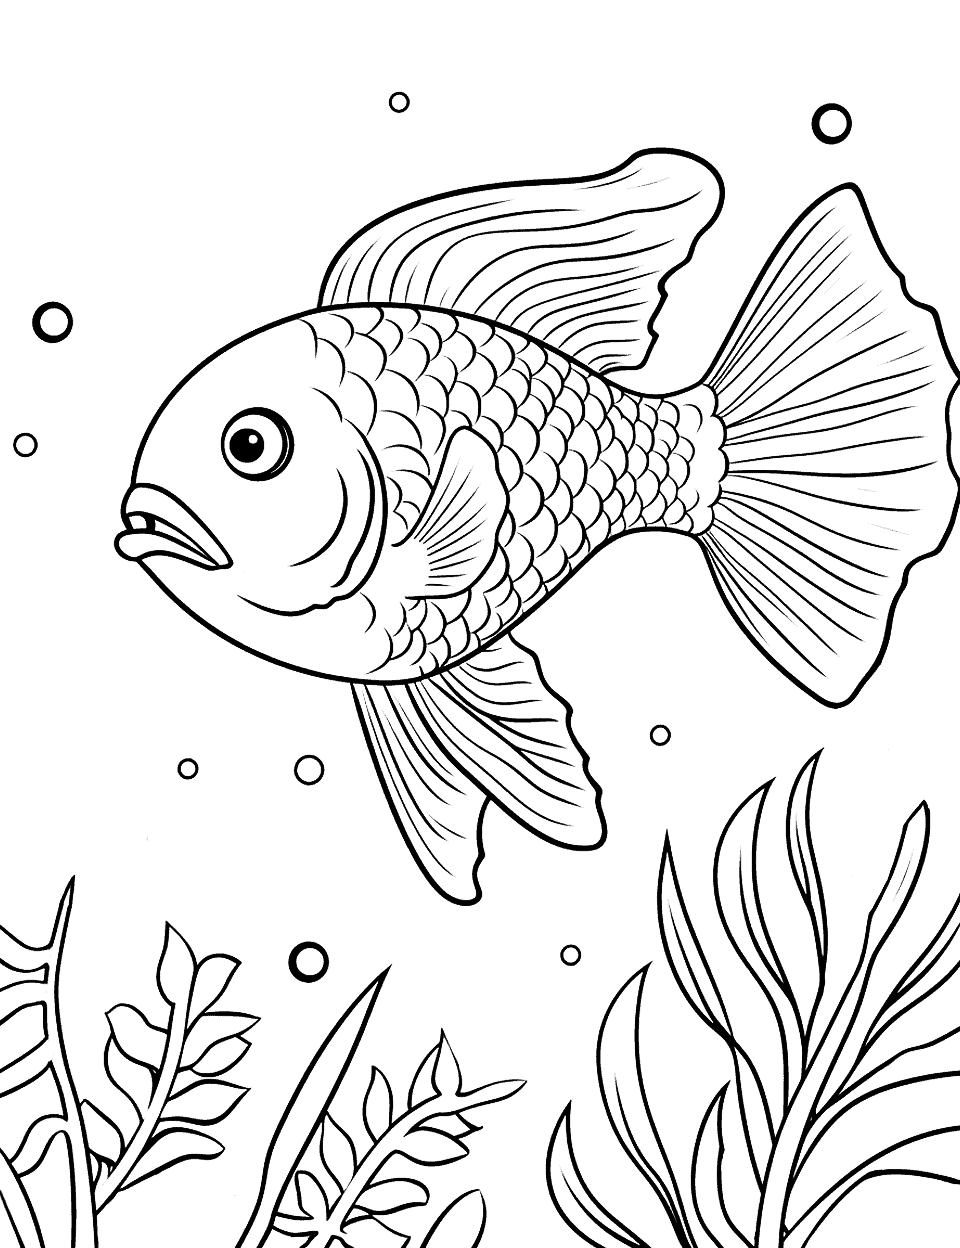 Fish in a Rainforest Coloring Page - Fish exploring a submerged rainforest with all its colorful flora and fauna.